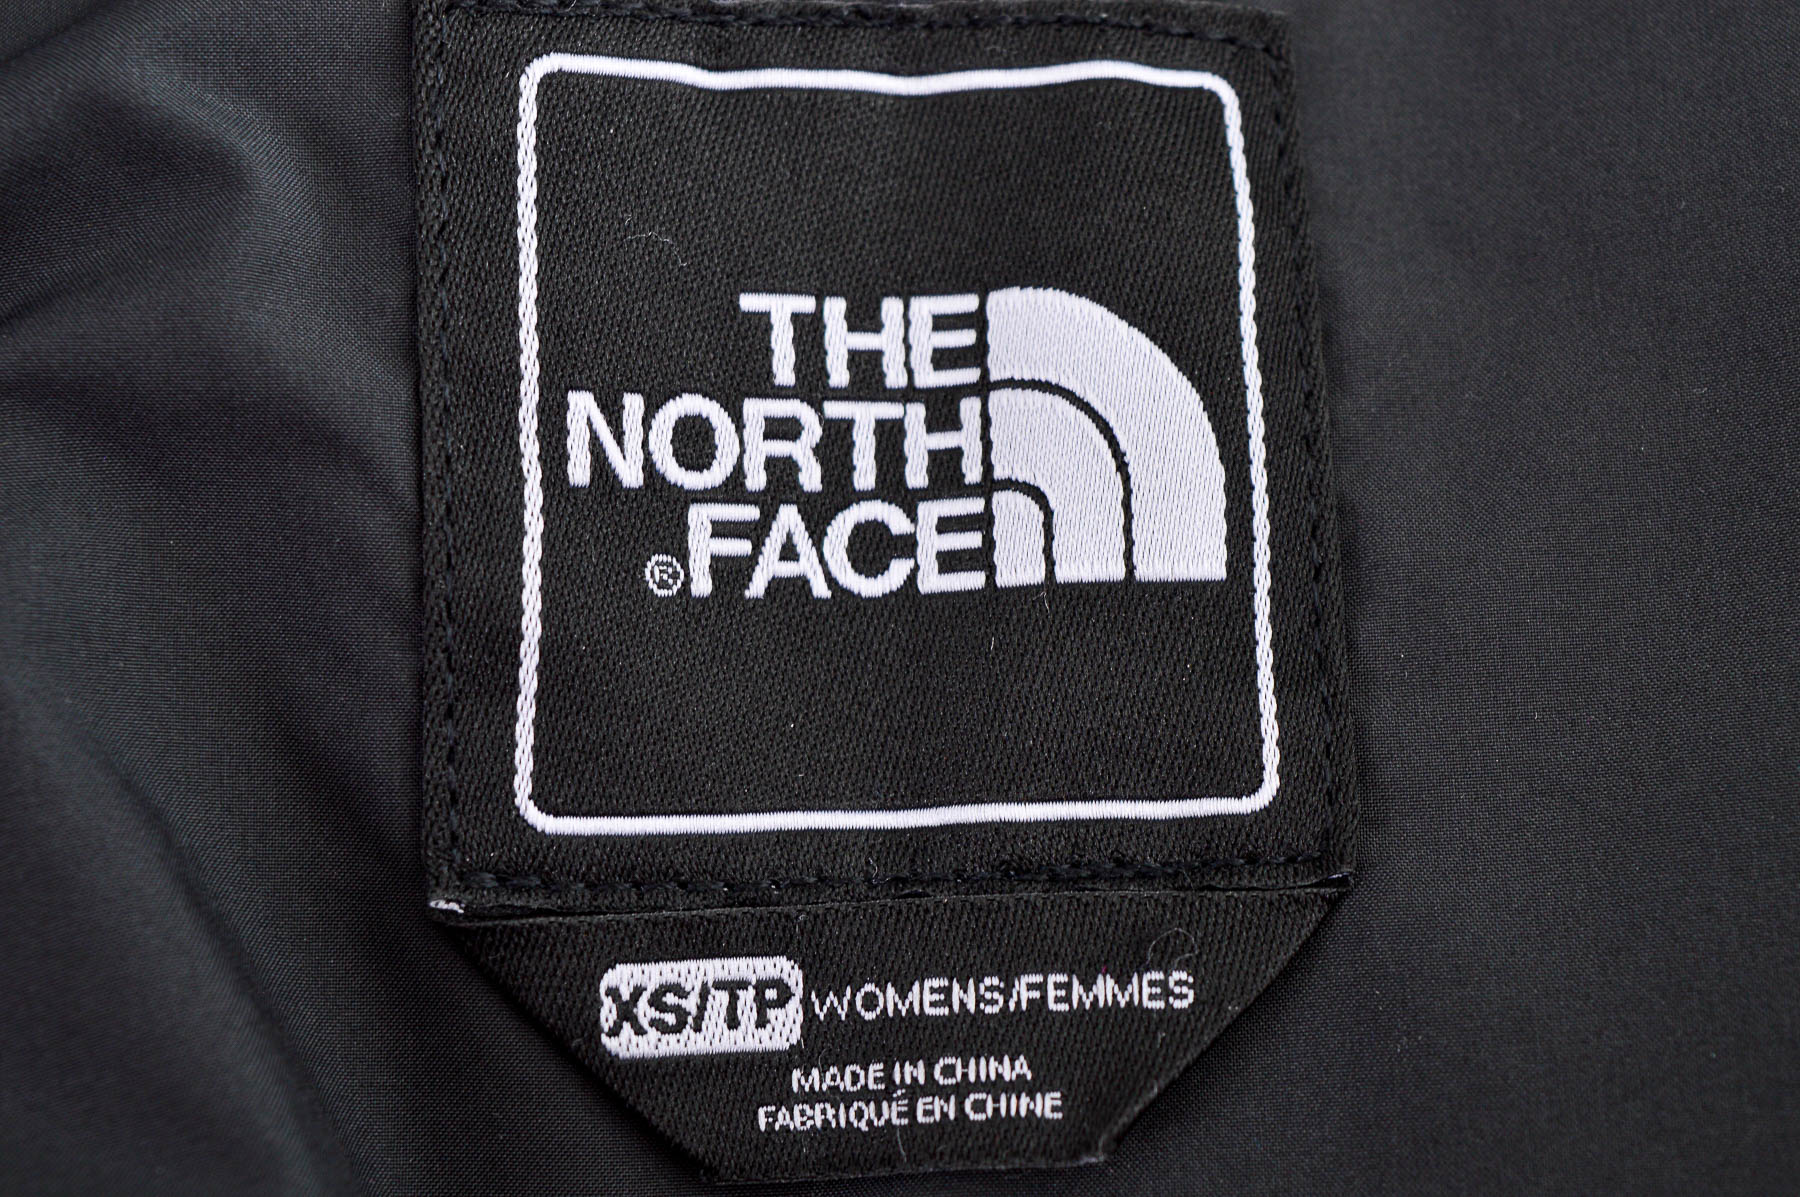 Ladies' Trench Coat - The North Face - 2